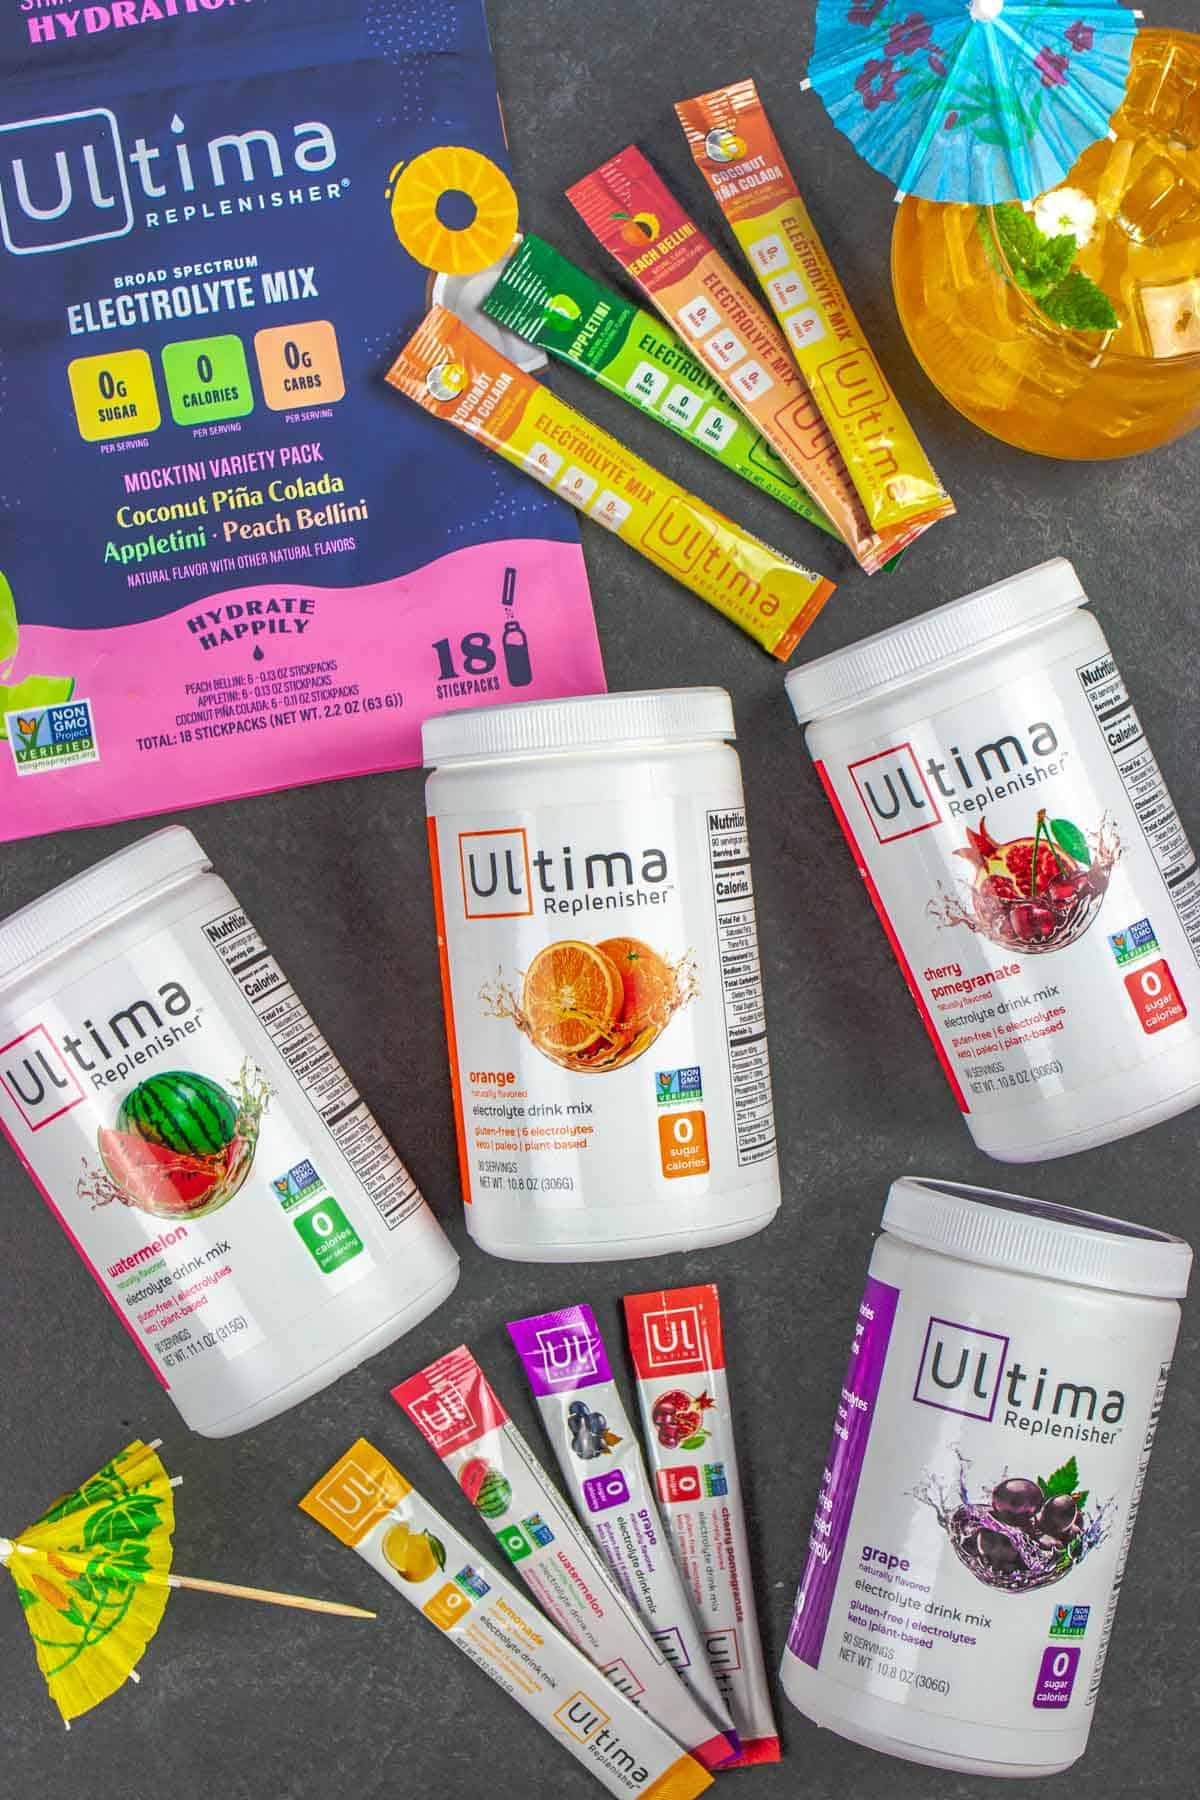 Assortment of Ultima brand electrolyte powders in packaging.